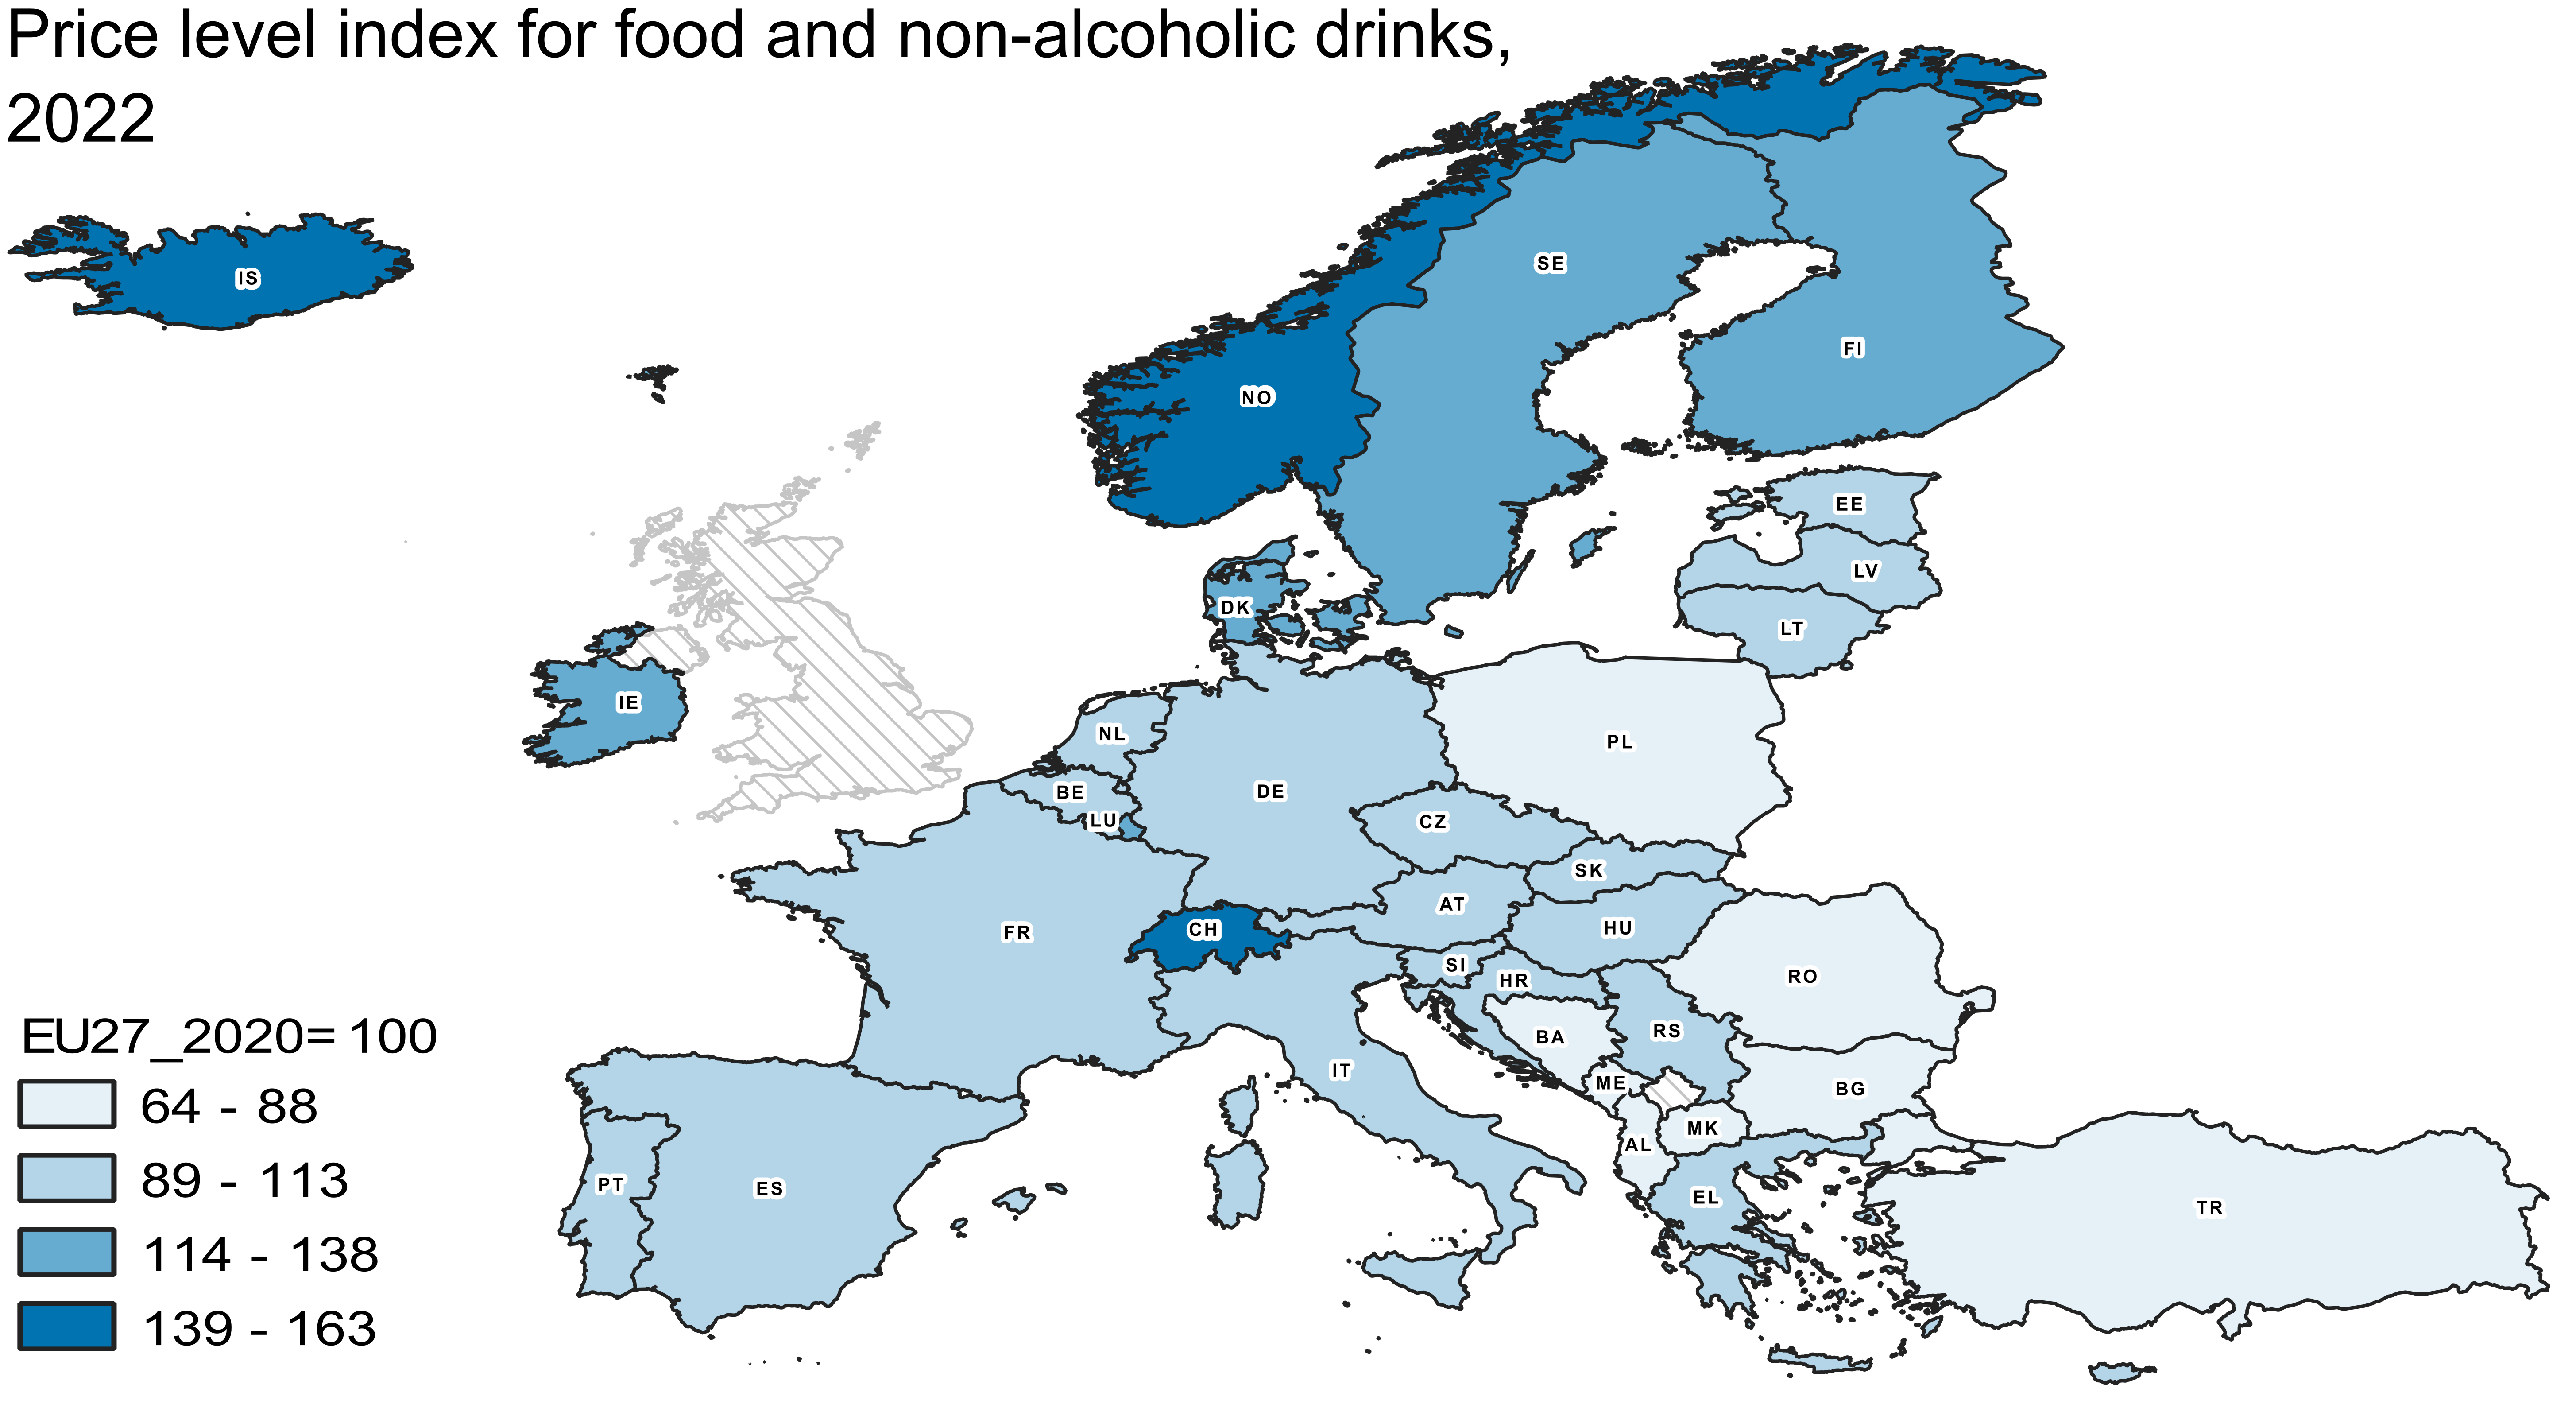 The map describes the price level differences of food and non-alcoholic beverages in European countries in 2022. Food and non-alcoholic beverages were most expensive in the EFTA countries Switzerland, Norway and Iceland. In these countries, the price level exceeded the EU average by 40 to 60 per cent. Food was most affordable in Türkiye and North Macedonia, their price level was less than 70 per cent of the EU average. The price levels for food in EU countries settled between these two groups.